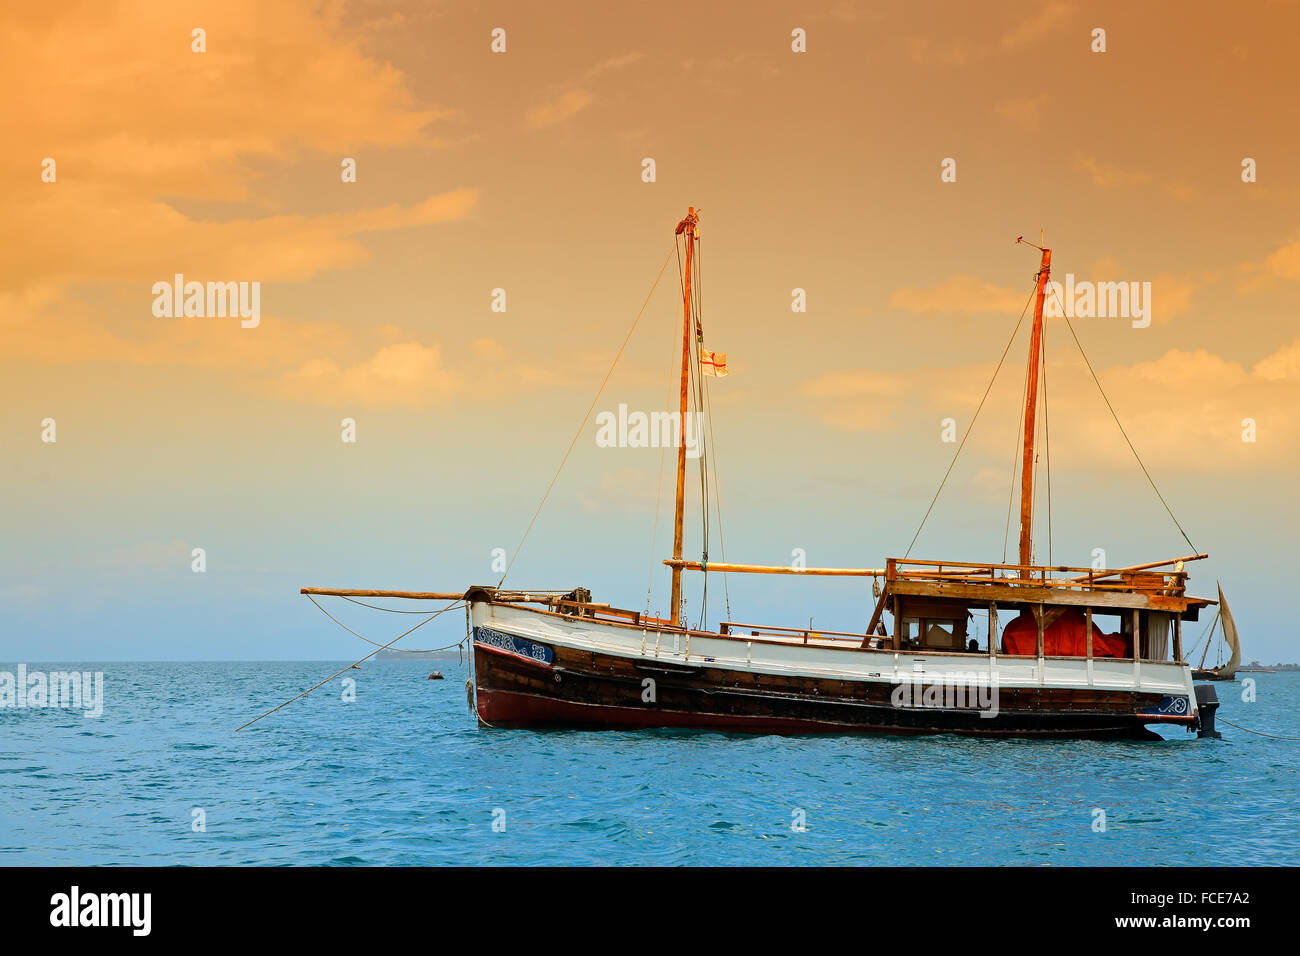 Wooden boat floating on the clear turquoise water of Zanzibar island Stock Photo